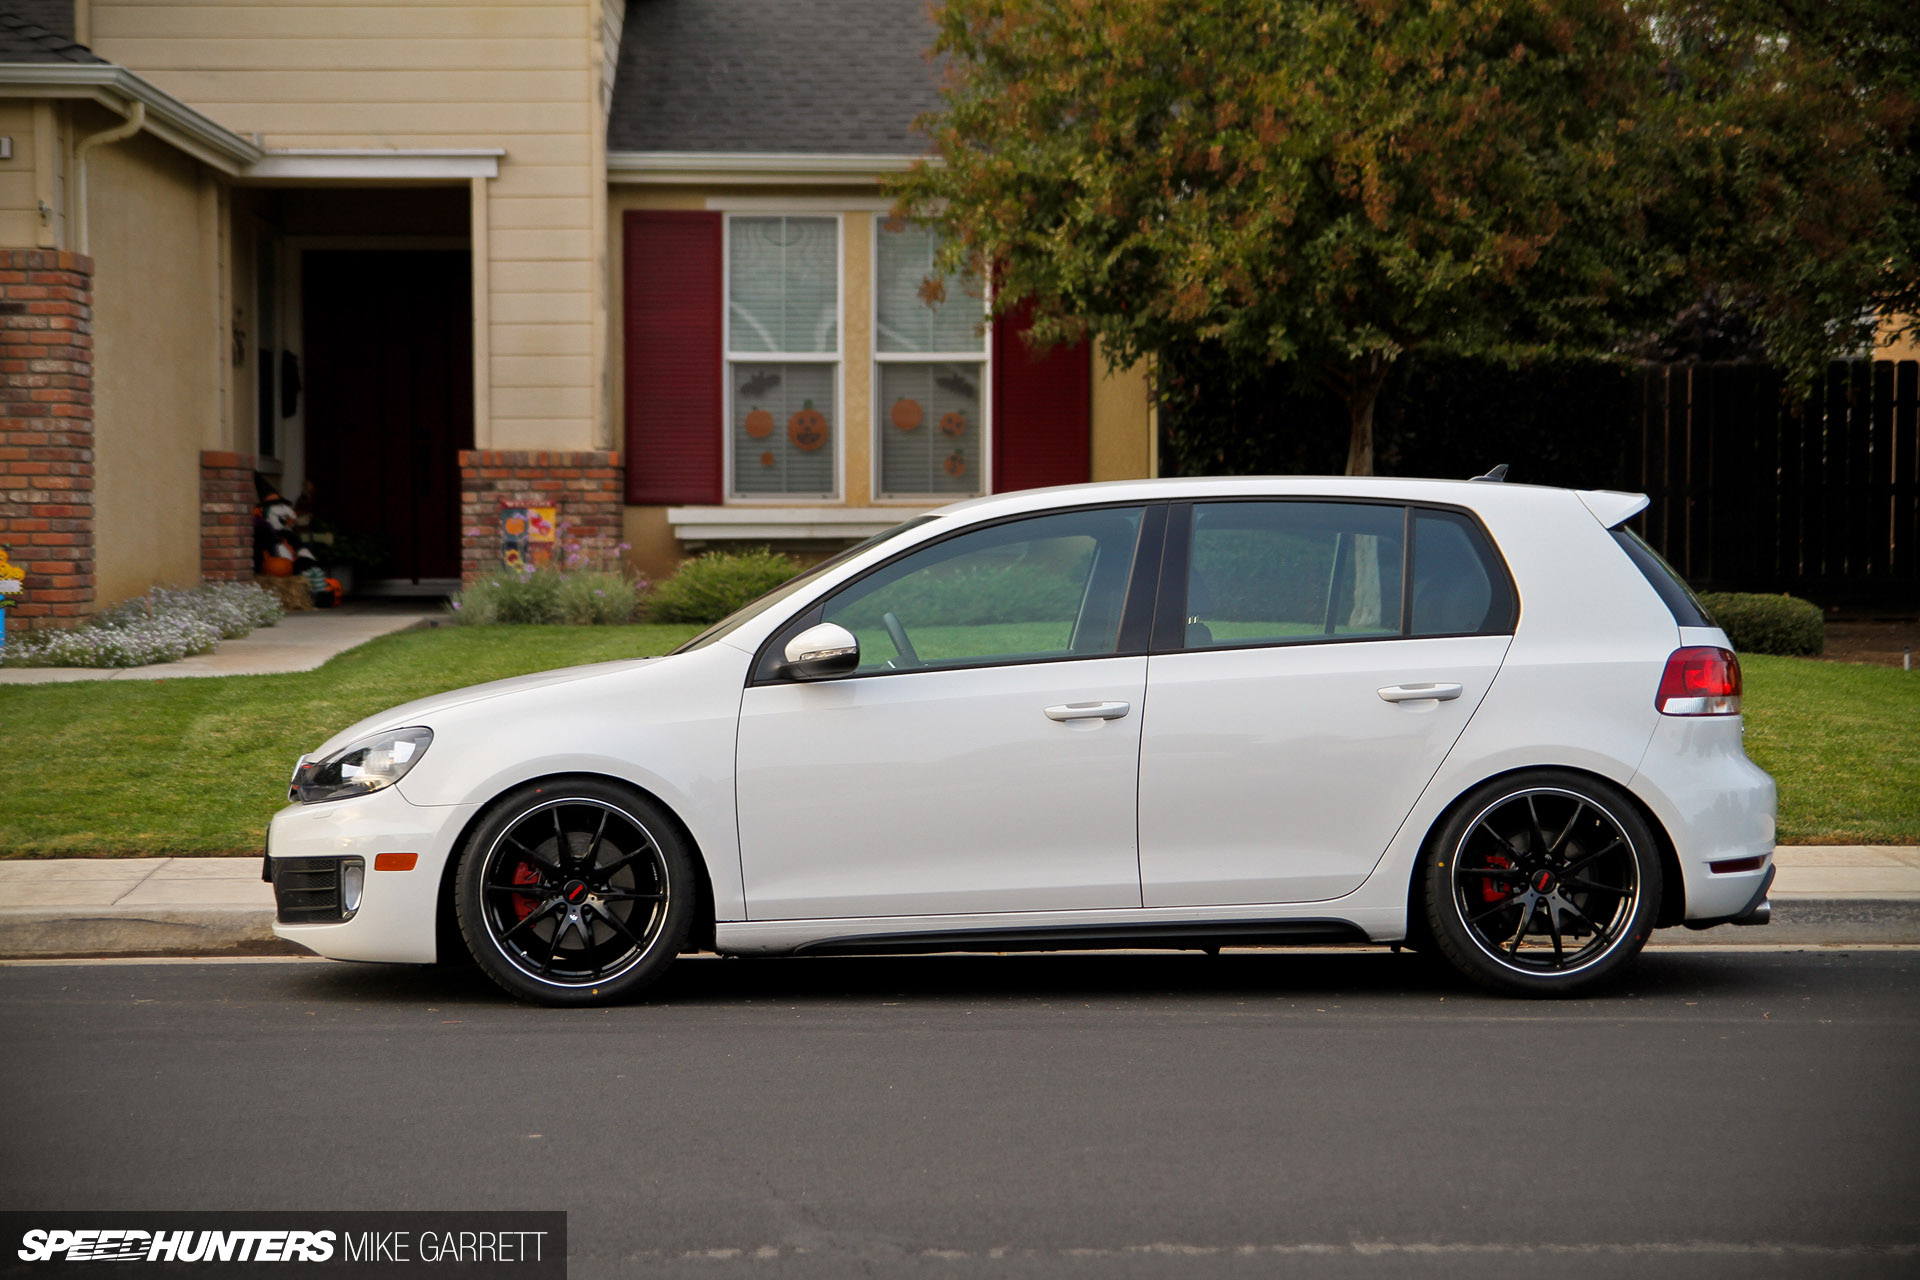 Weight Down, Style Up: RAYS For Project GTI - Speedhunters